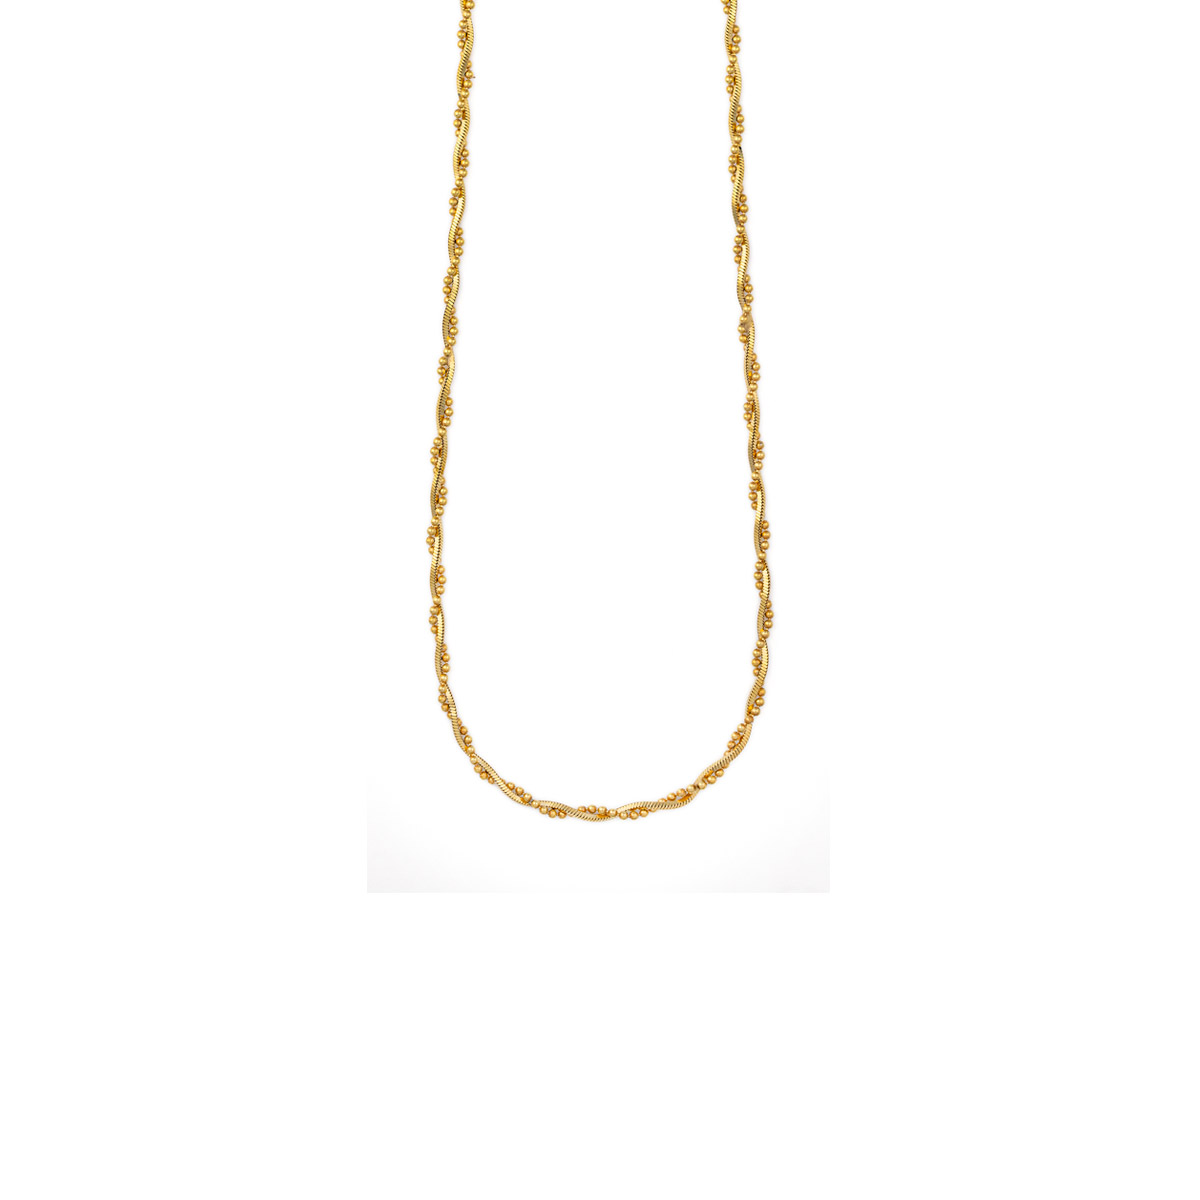 925 Sterling Silver and Gold Plated Treccia Chain in Length 55cm - GREEK  ROOTS